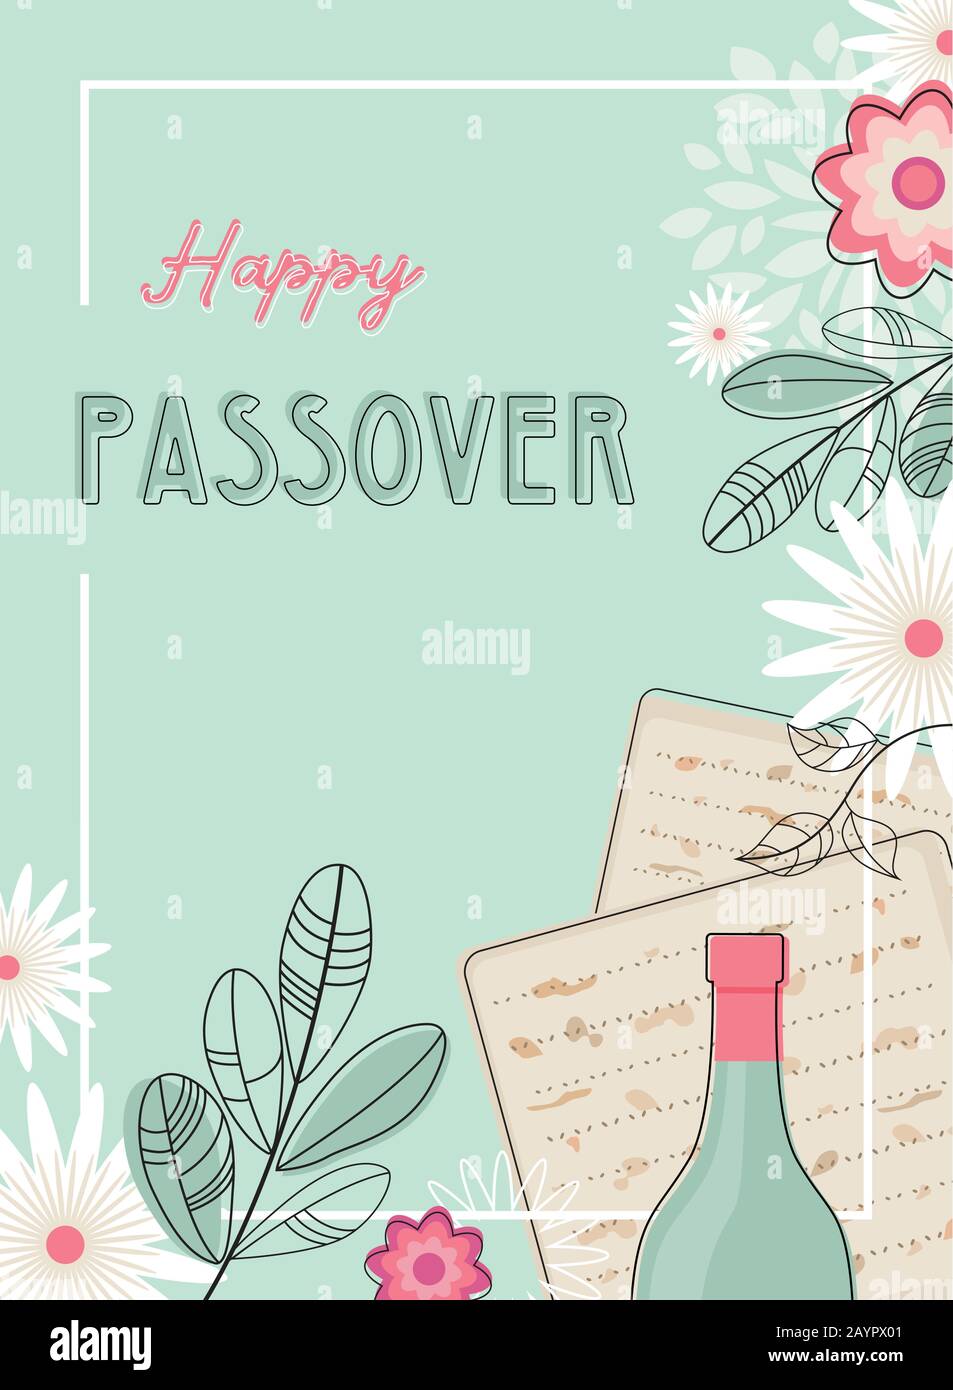 happy passover greeting card or seder invitation with spring flowers. Jewish holiday. Stock Vector